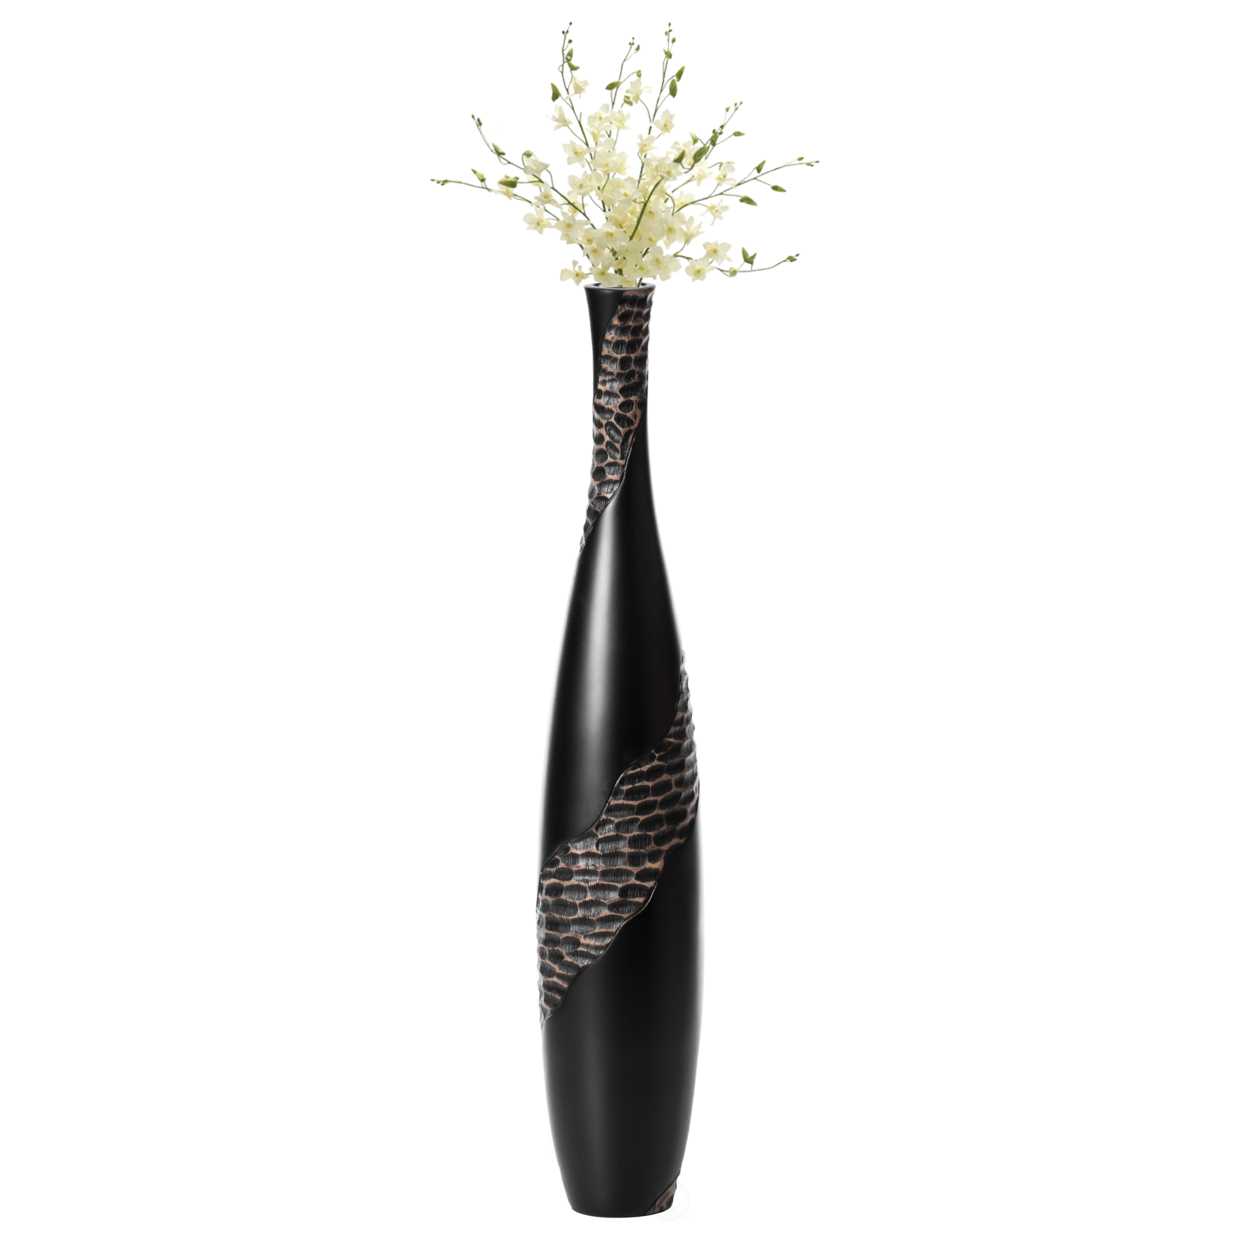 Contemporary Bottle Shape Decorative Floor Vase, Brown With Cobbled Stone Pattern - Small